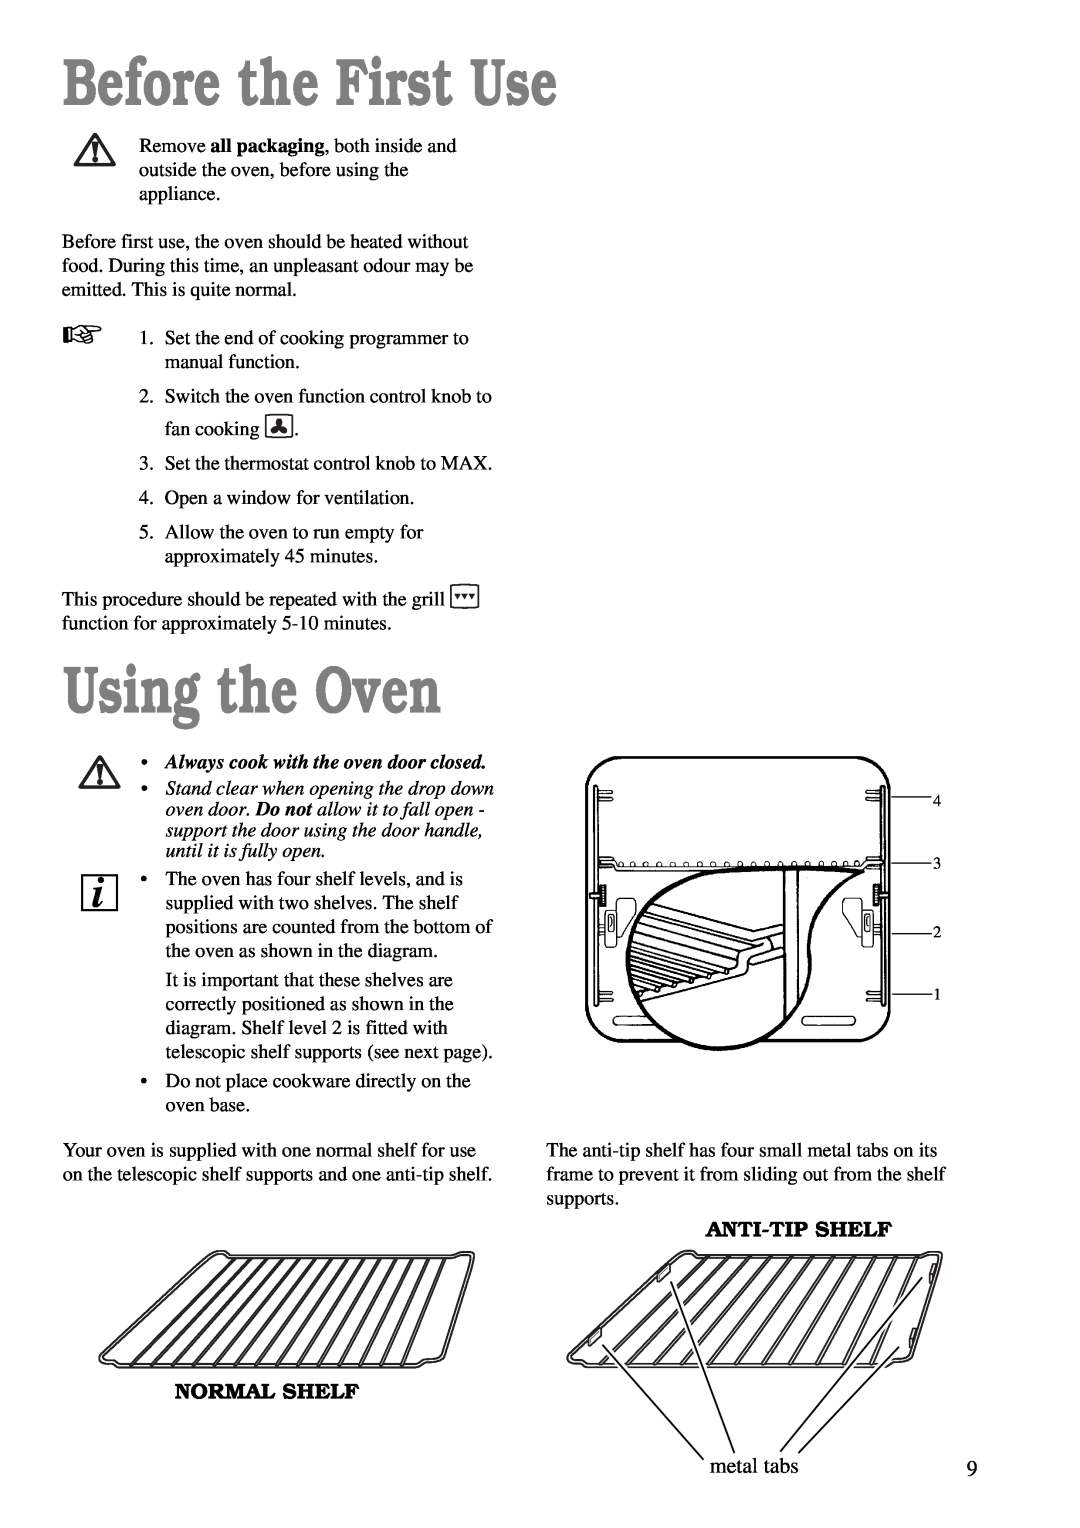 Tricity Bendix TBS 605 manual Before the First Use, Using the Oven, Anti-Tip Shelf Normal Shelf, metal tabs 